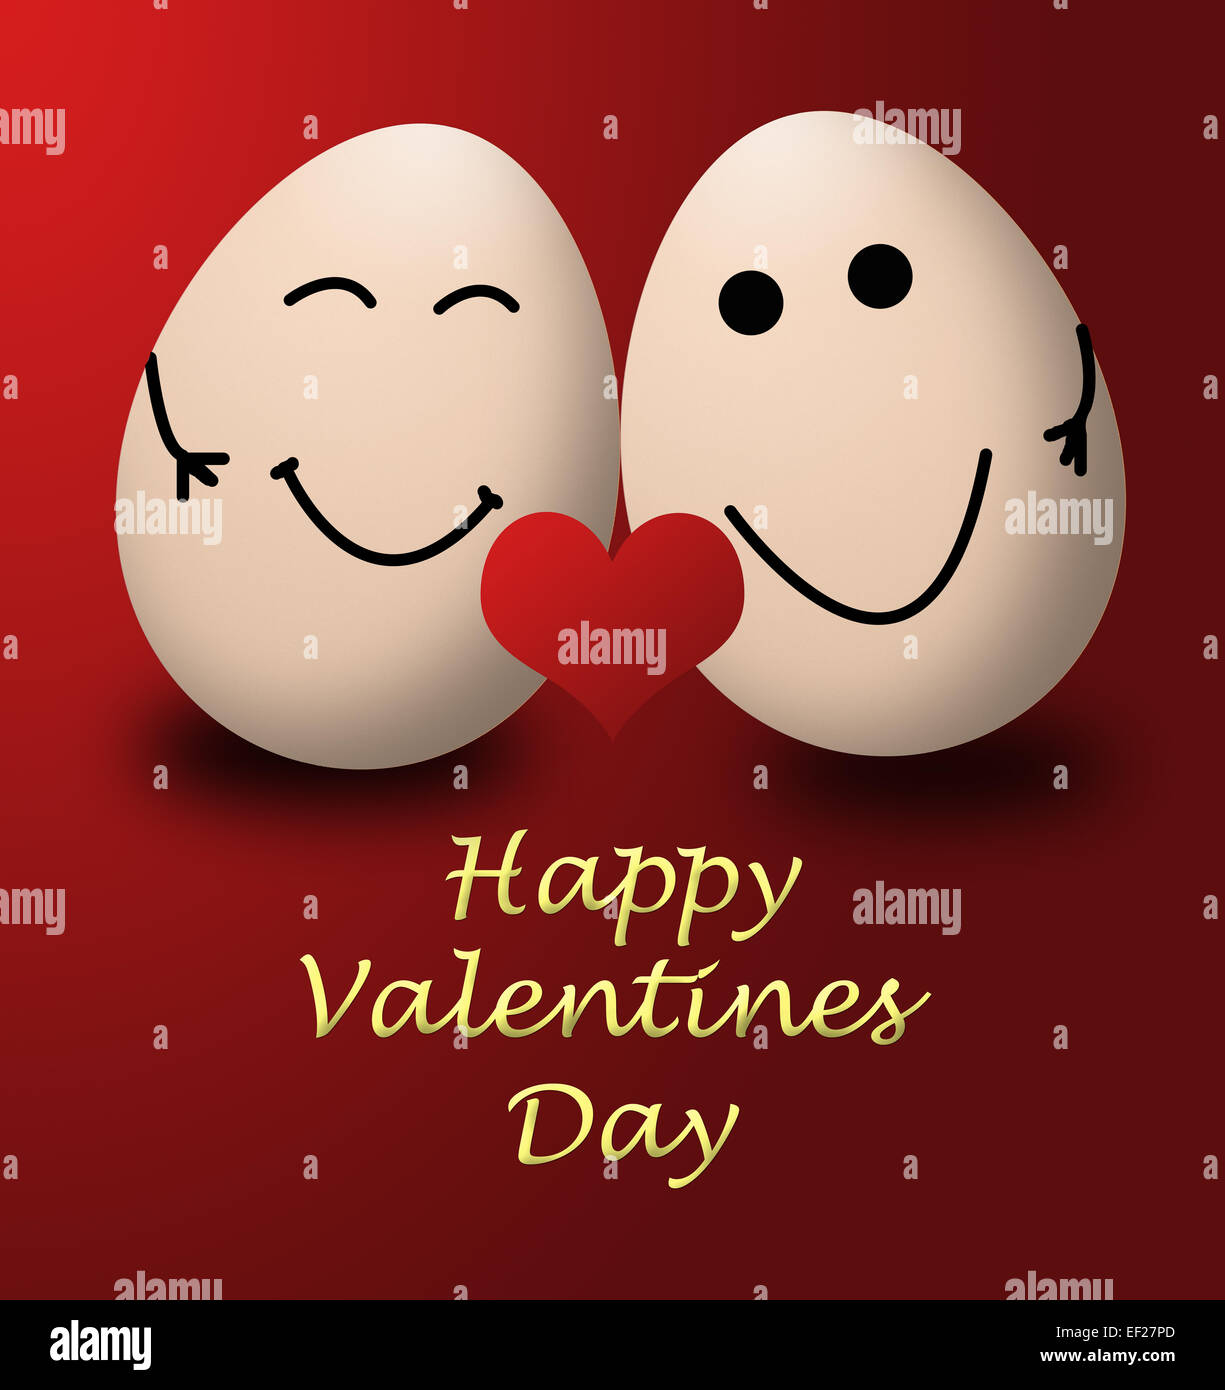 happy valentines day my egg love red heart Stock Photo: 78111333 - Alamy1225 x 1390